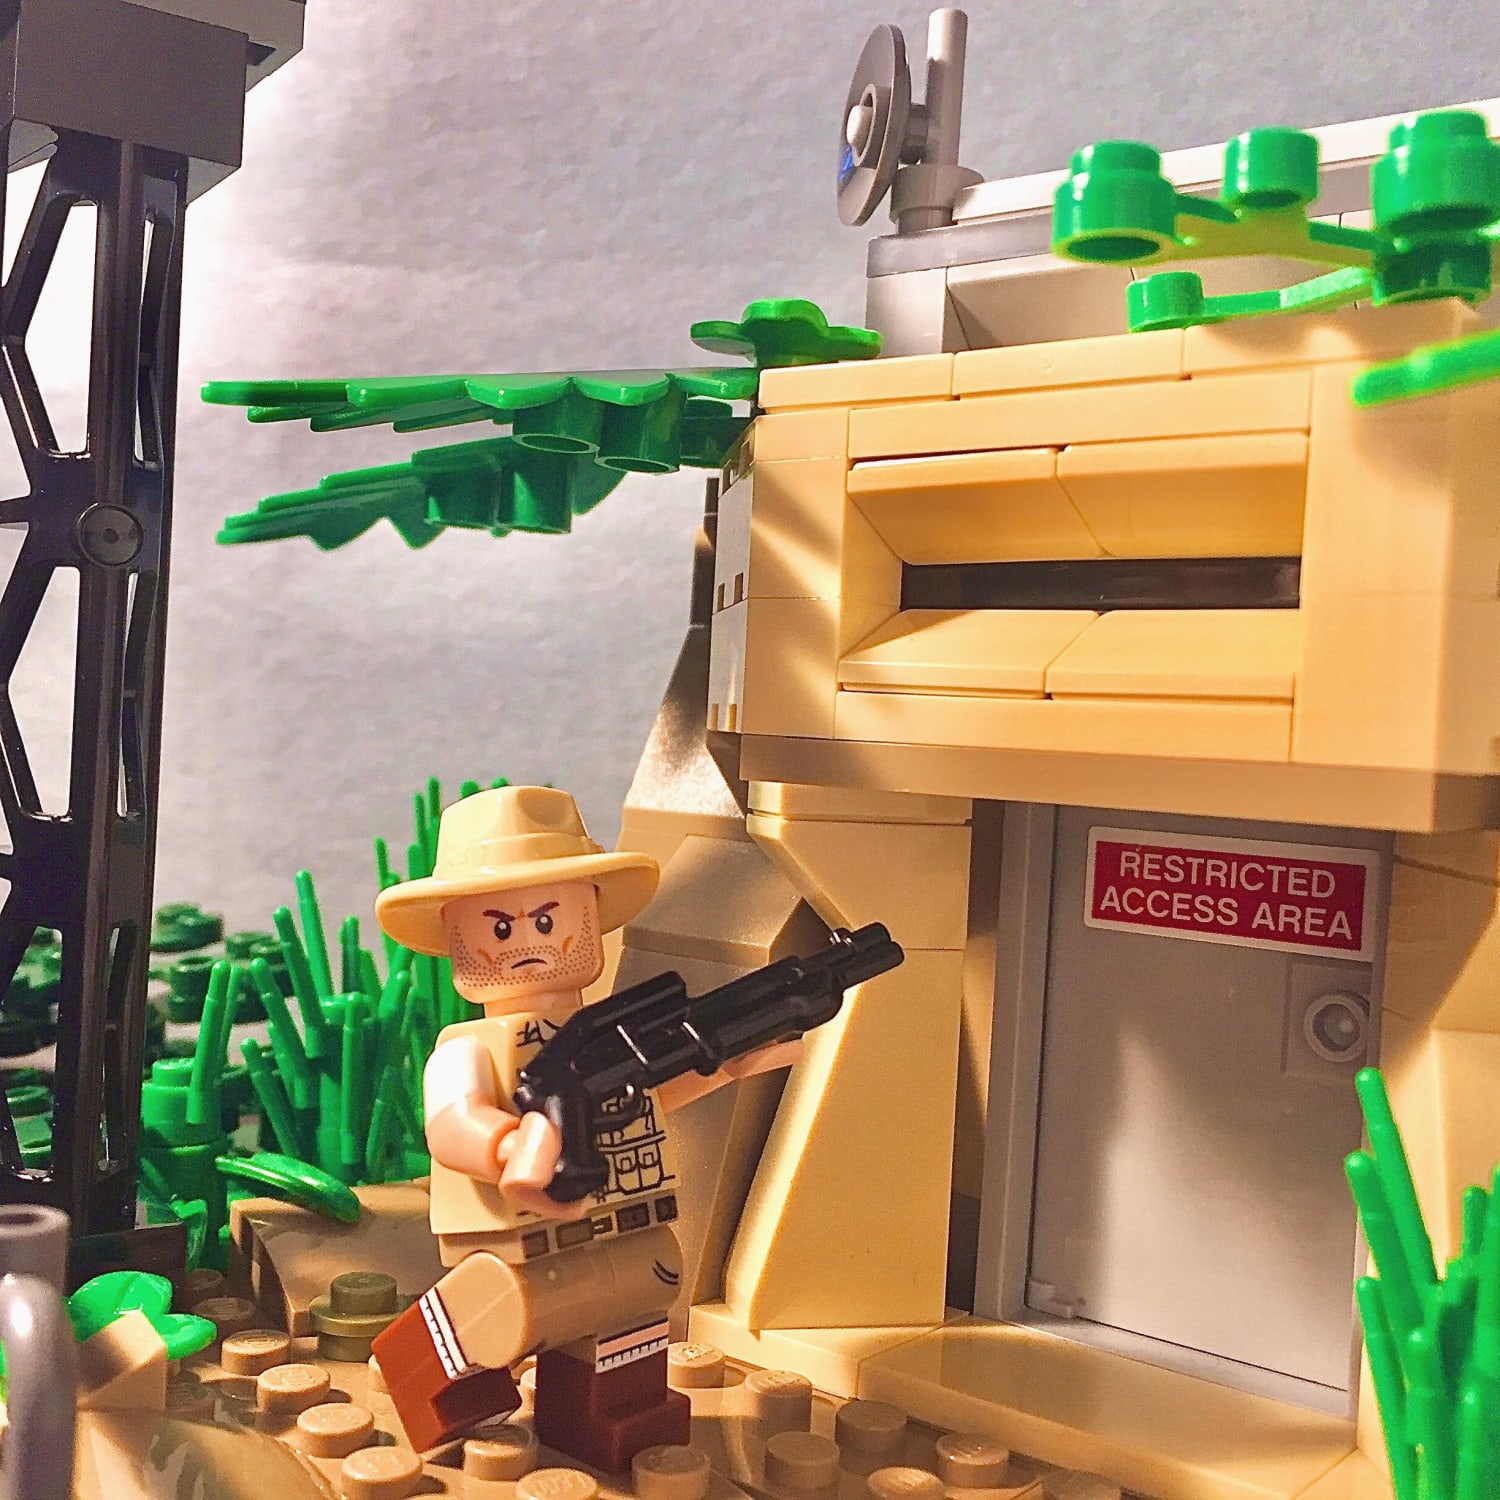 The Wonder Woman 84 bunker without the radar tower works really well for Jurassic Park, made a scene with a custom Robert Muldoon